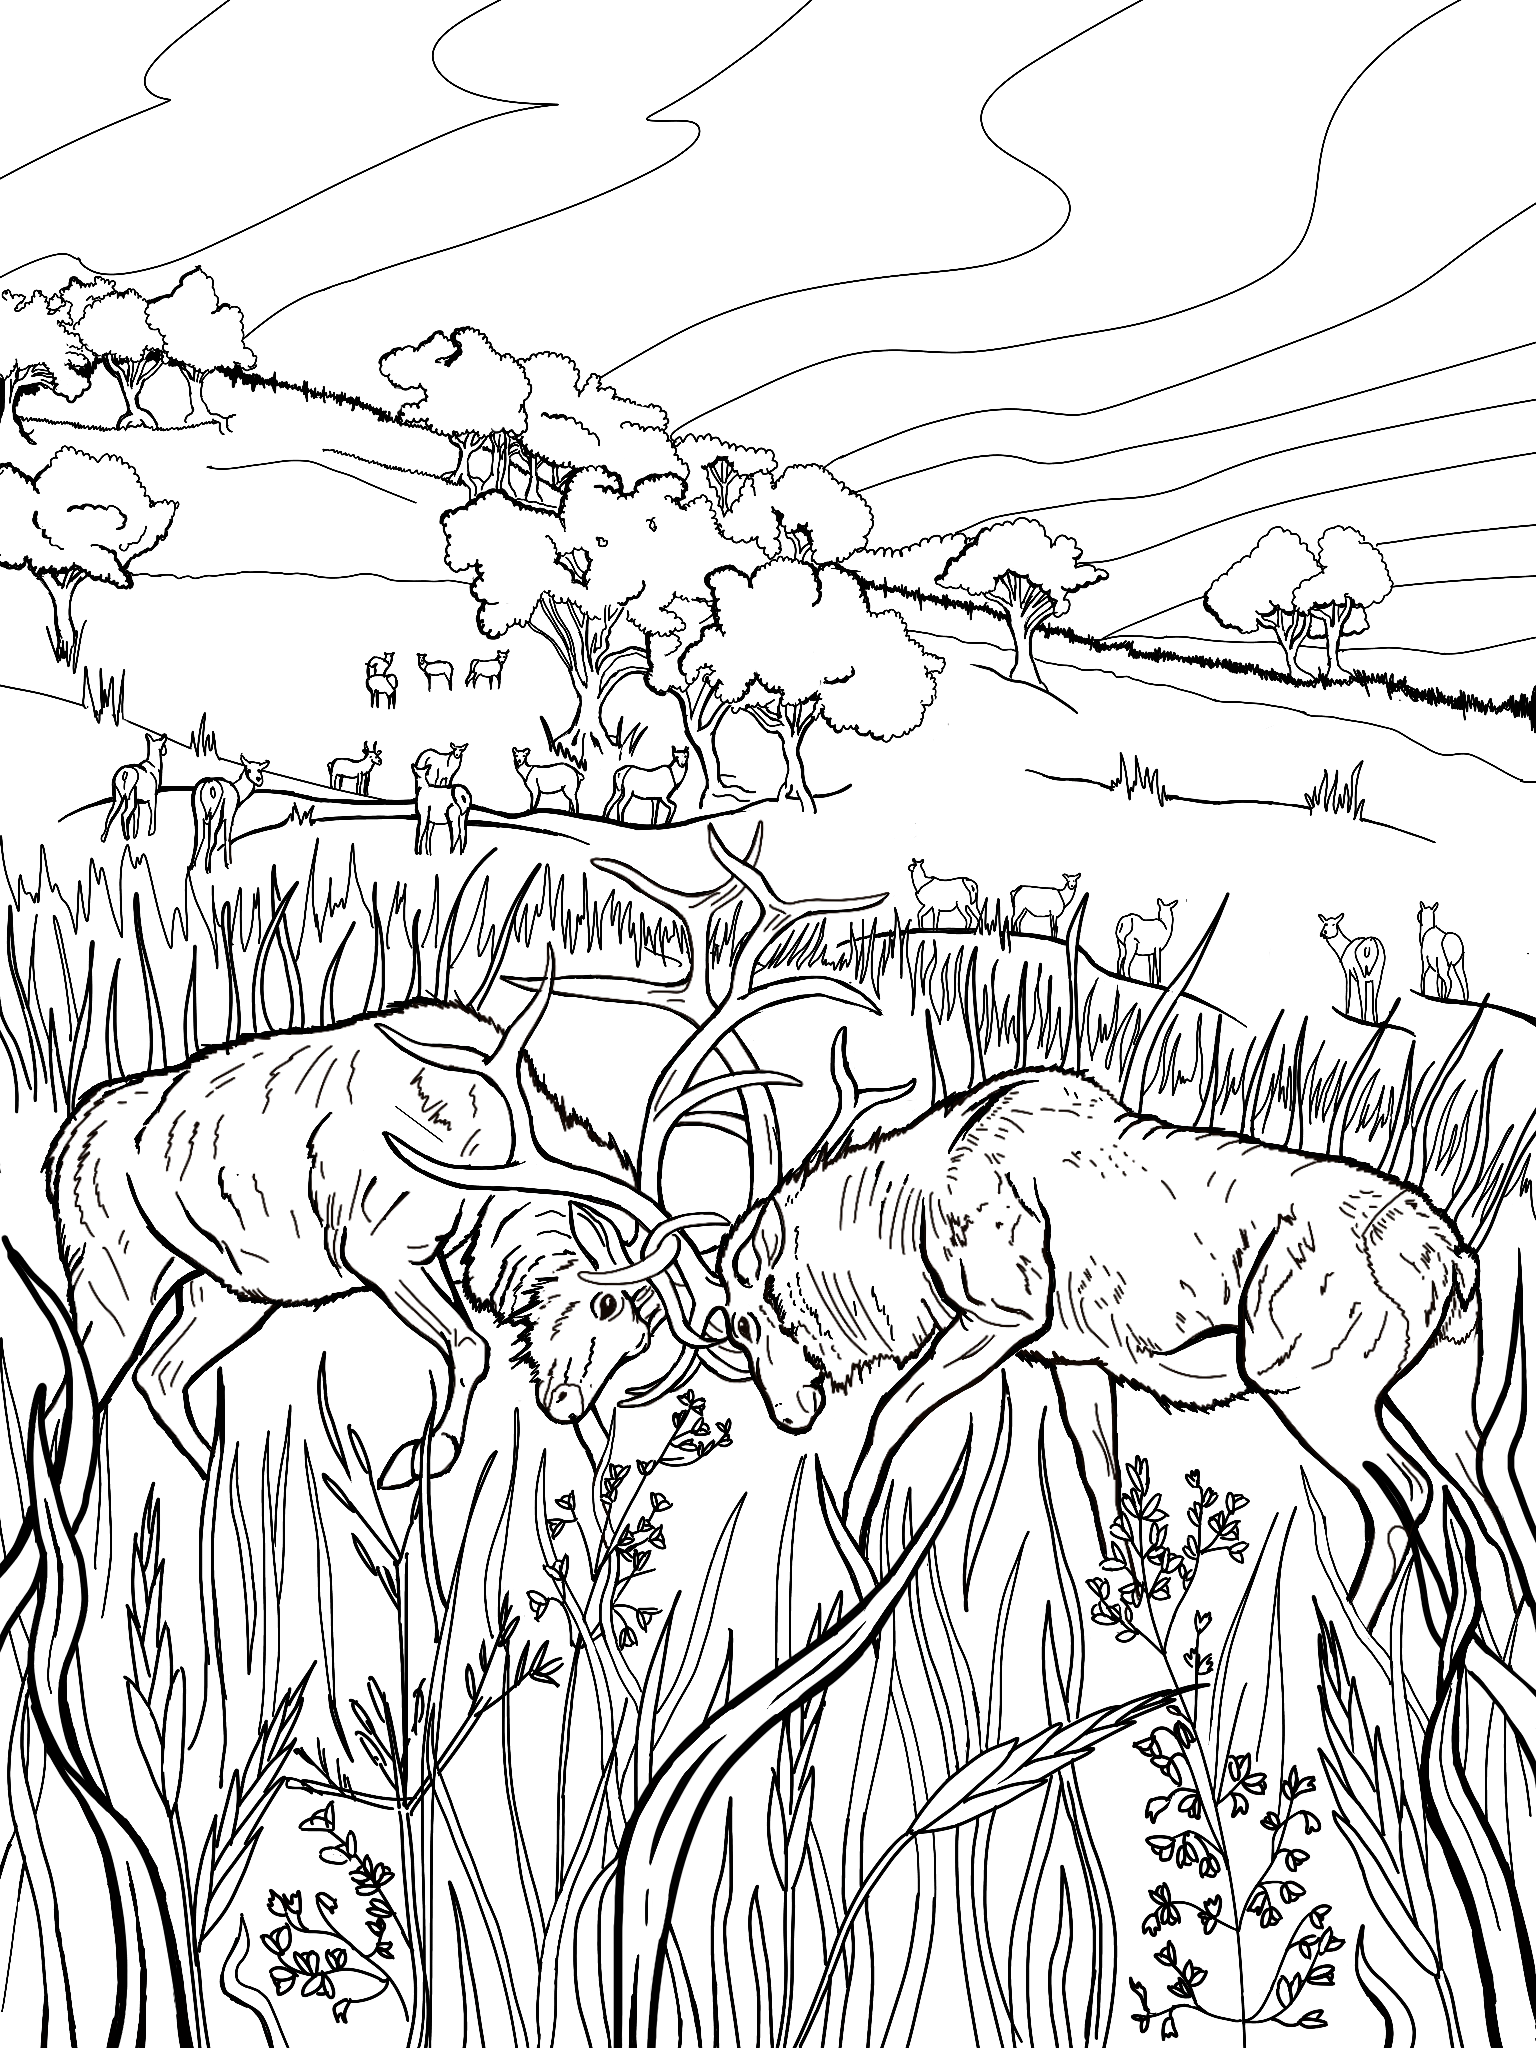 A black and white graphic shows 2 male elk sparing with their antlers in a prairie. The female elk can be seen in the background, dispersed around the oak trees. The whole scene is depicted in the bald hills, an oakland prairie.